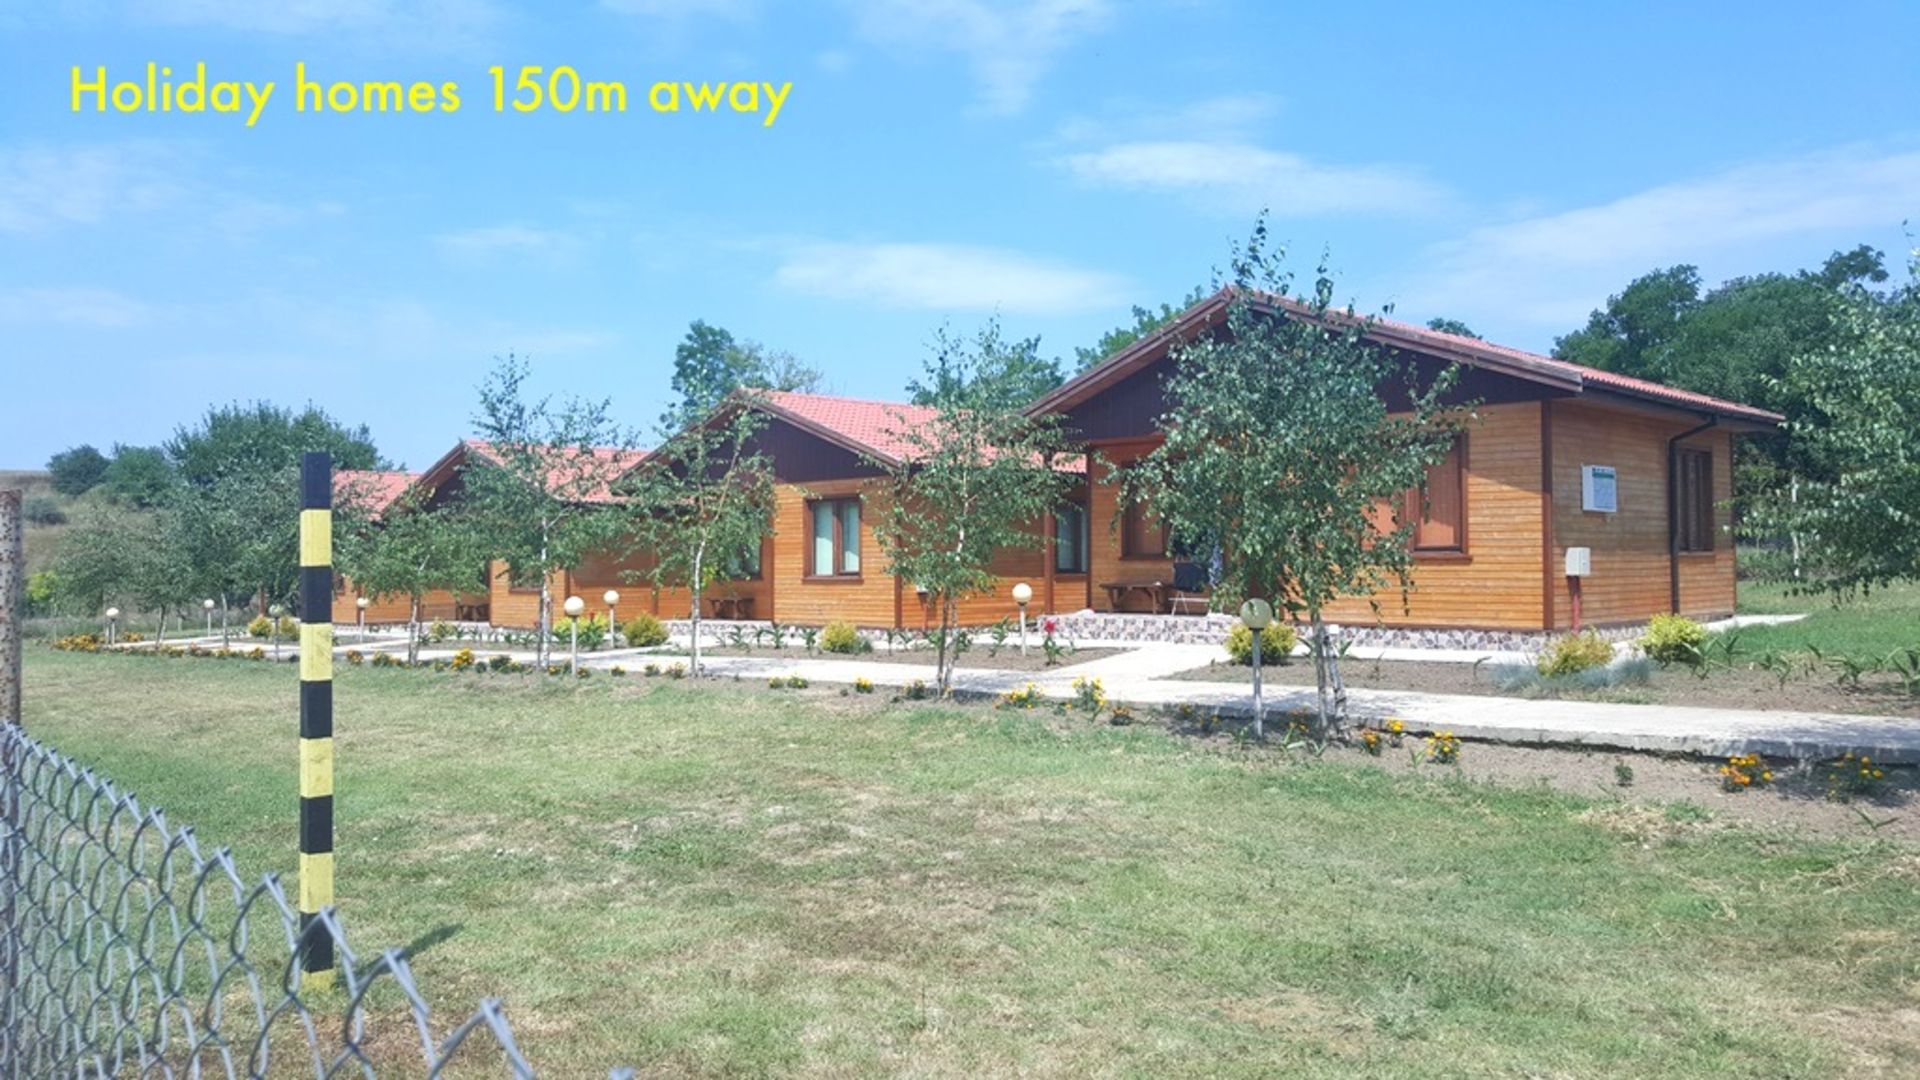 SUNFLOWER COTTAGE IN KRASEN, BULGARIA  - 30 miles from Beach! - Image 42 of 64